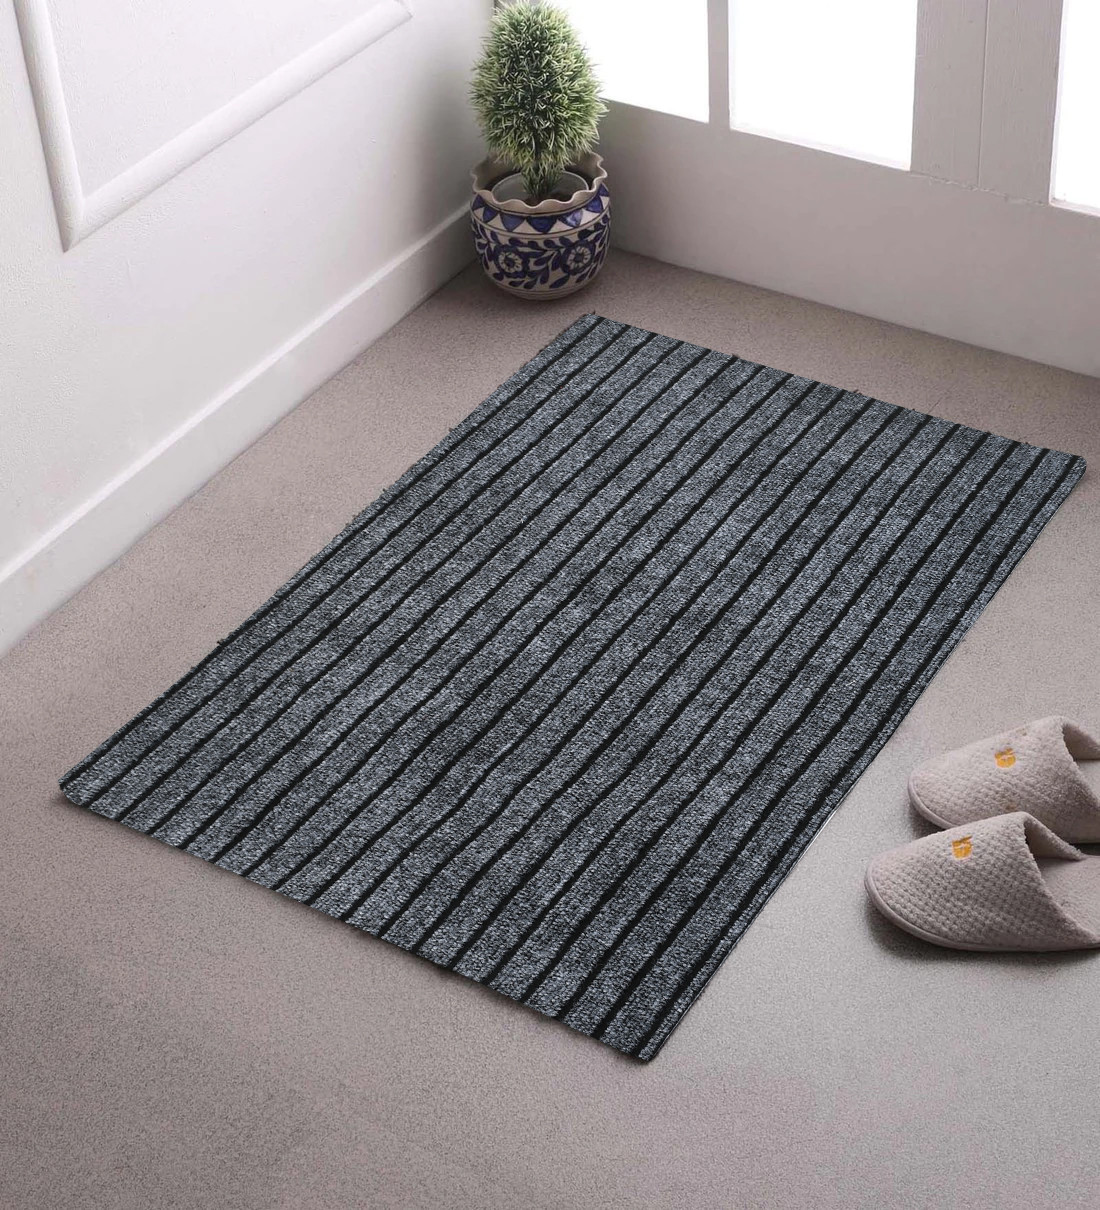 Kuber Industries All Weather Entry and Back Yard Door Mat, Non-Slip Rubber Backing, Absorbent and Waterproof, Dirt Trapping Rugs for Entryway -24